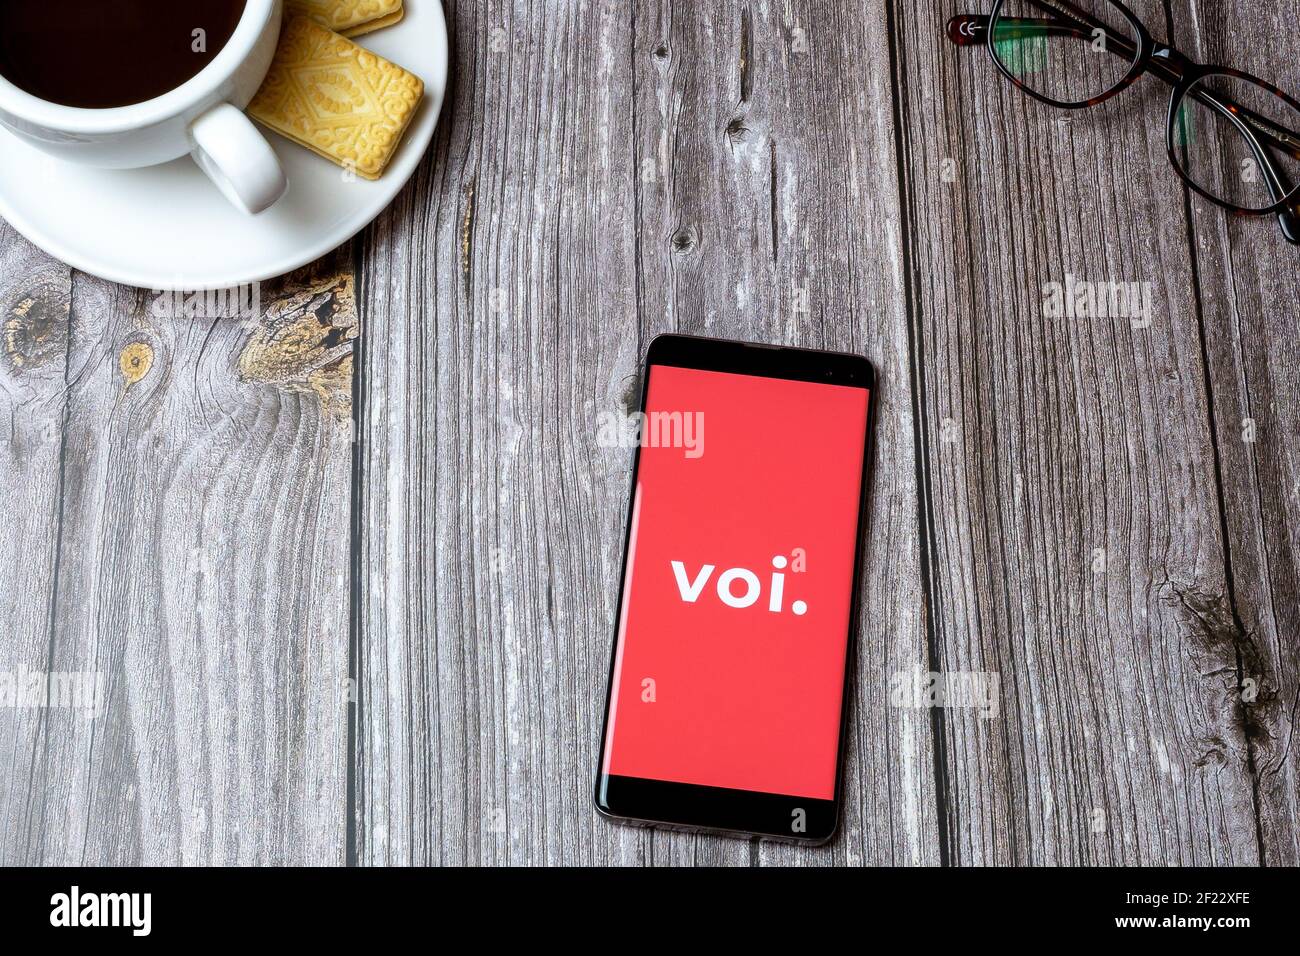 A mobile phone or cell phone on a wooden table with the VOI scooters app open next to a coffee and glasses Stock Photo